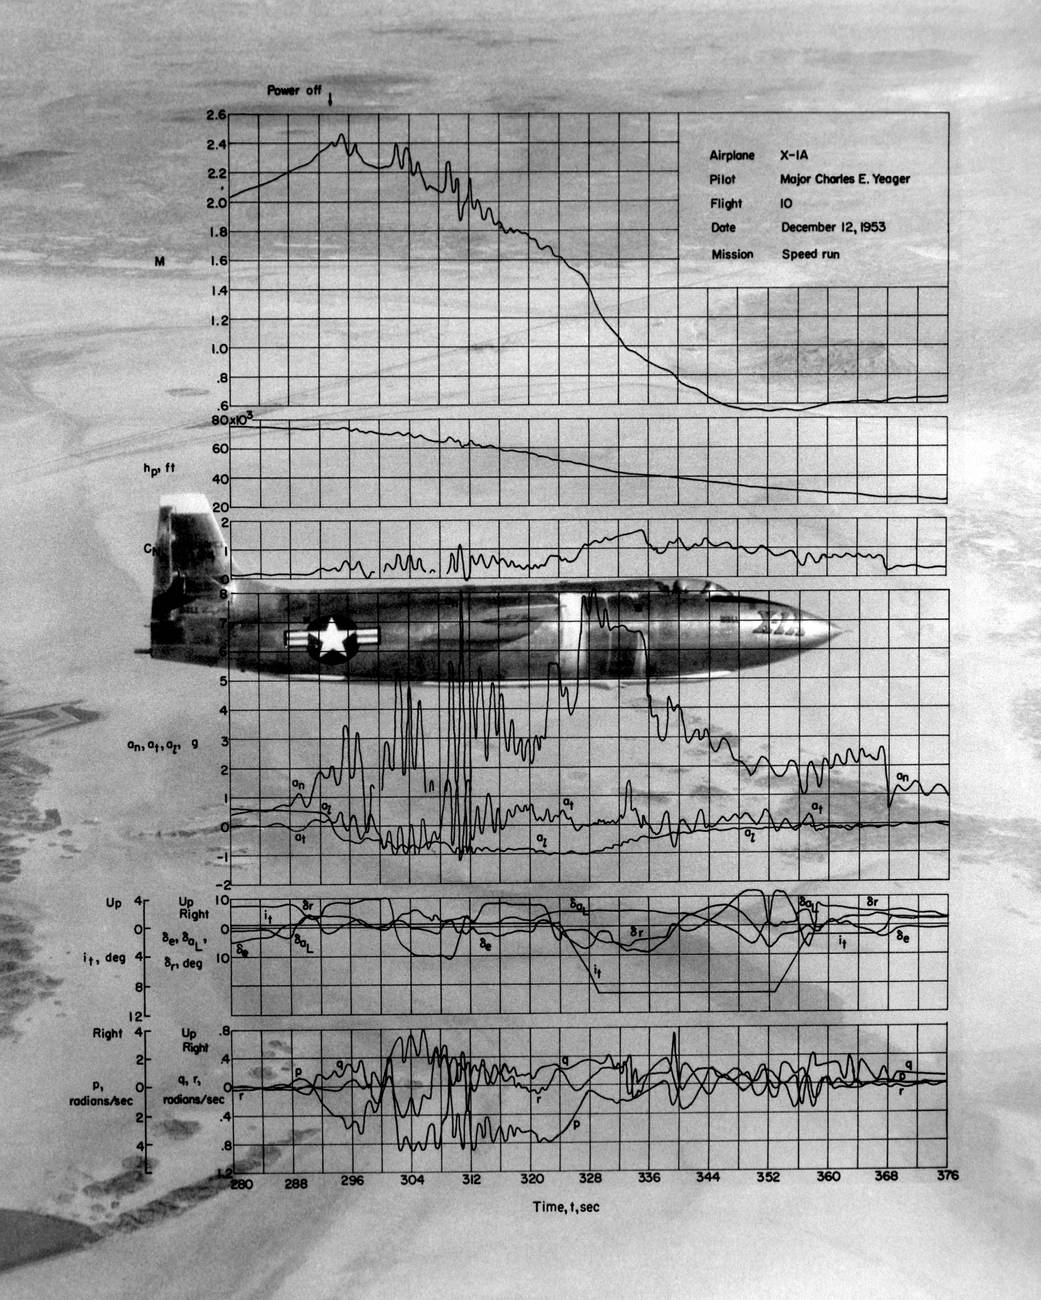 Yeager's Mach 2.44 Flight in the X-1A